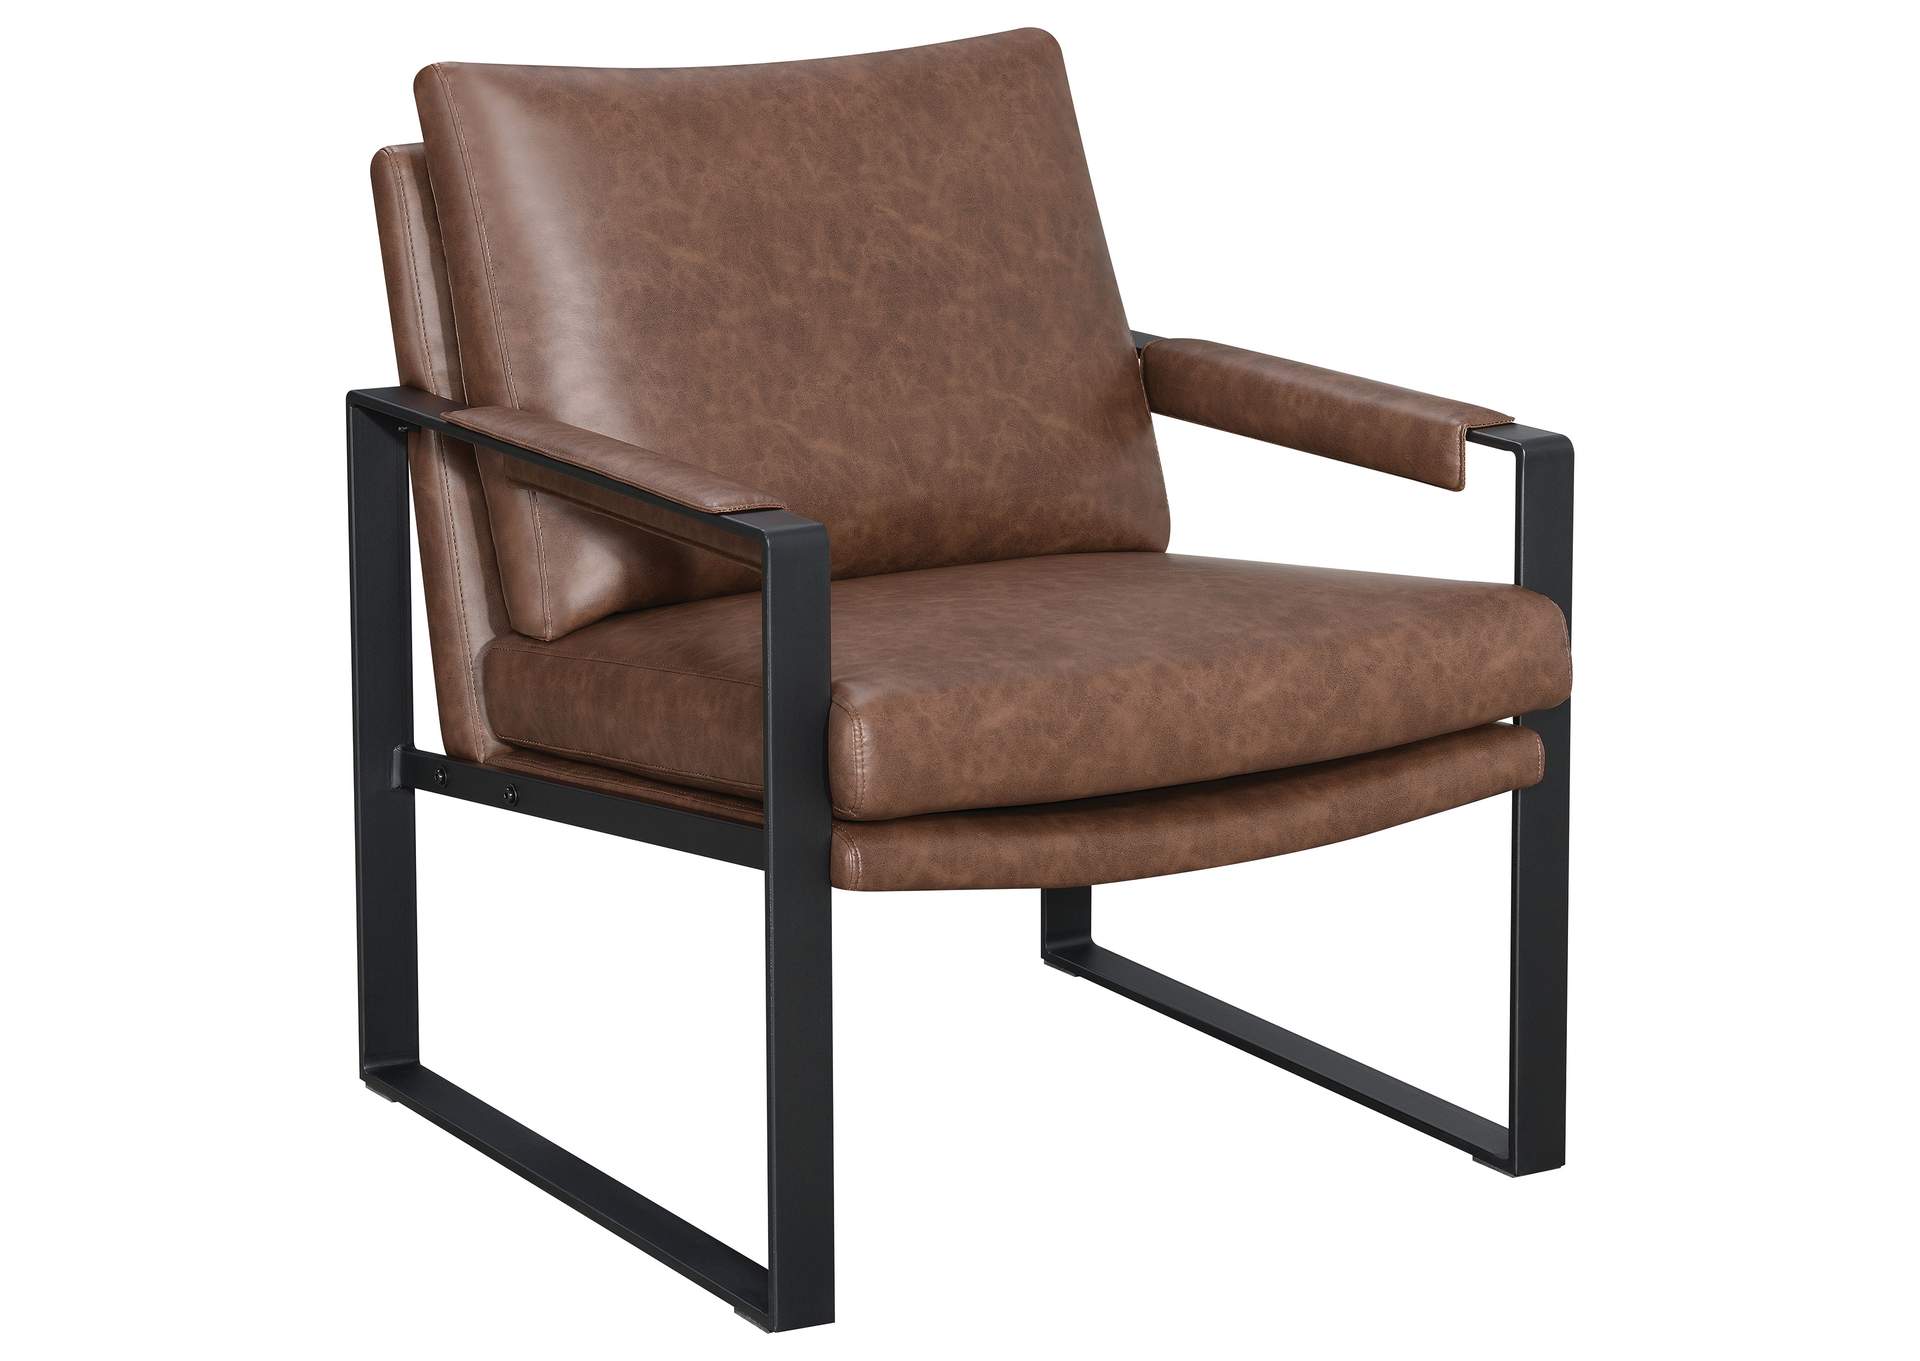 Rosalind Upholstered Accent Chair with Removable Cushion Umber Brown and Gunmetal,Coaster Furniture